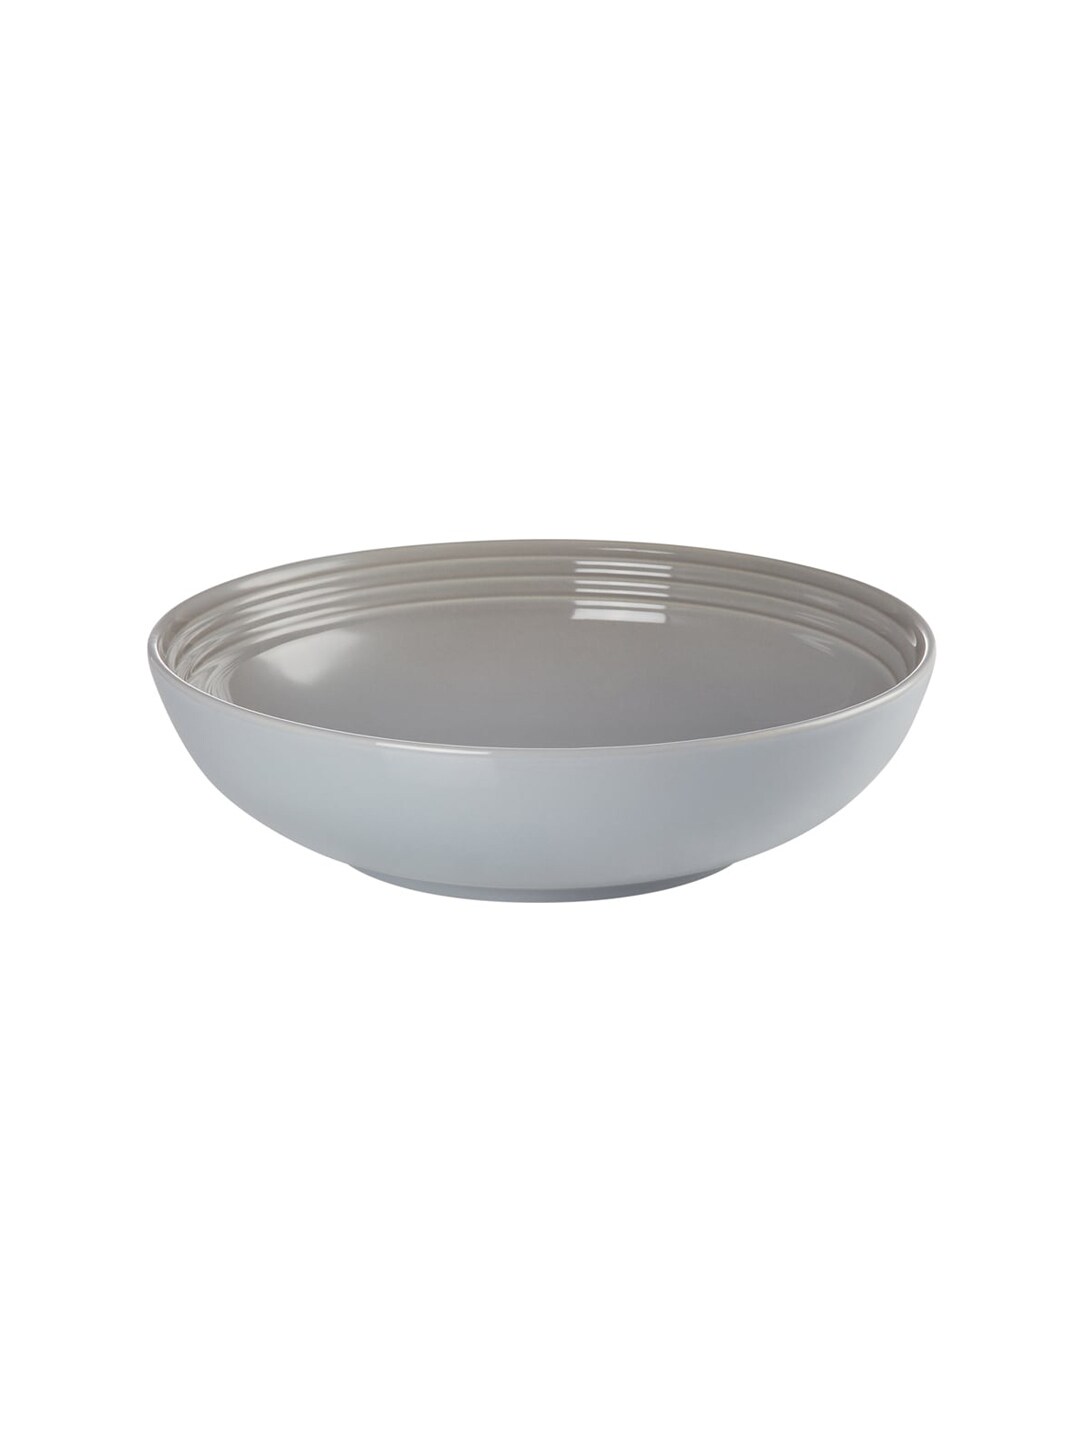 LE CREUSET Grey Solid Serving Bowl Price in India